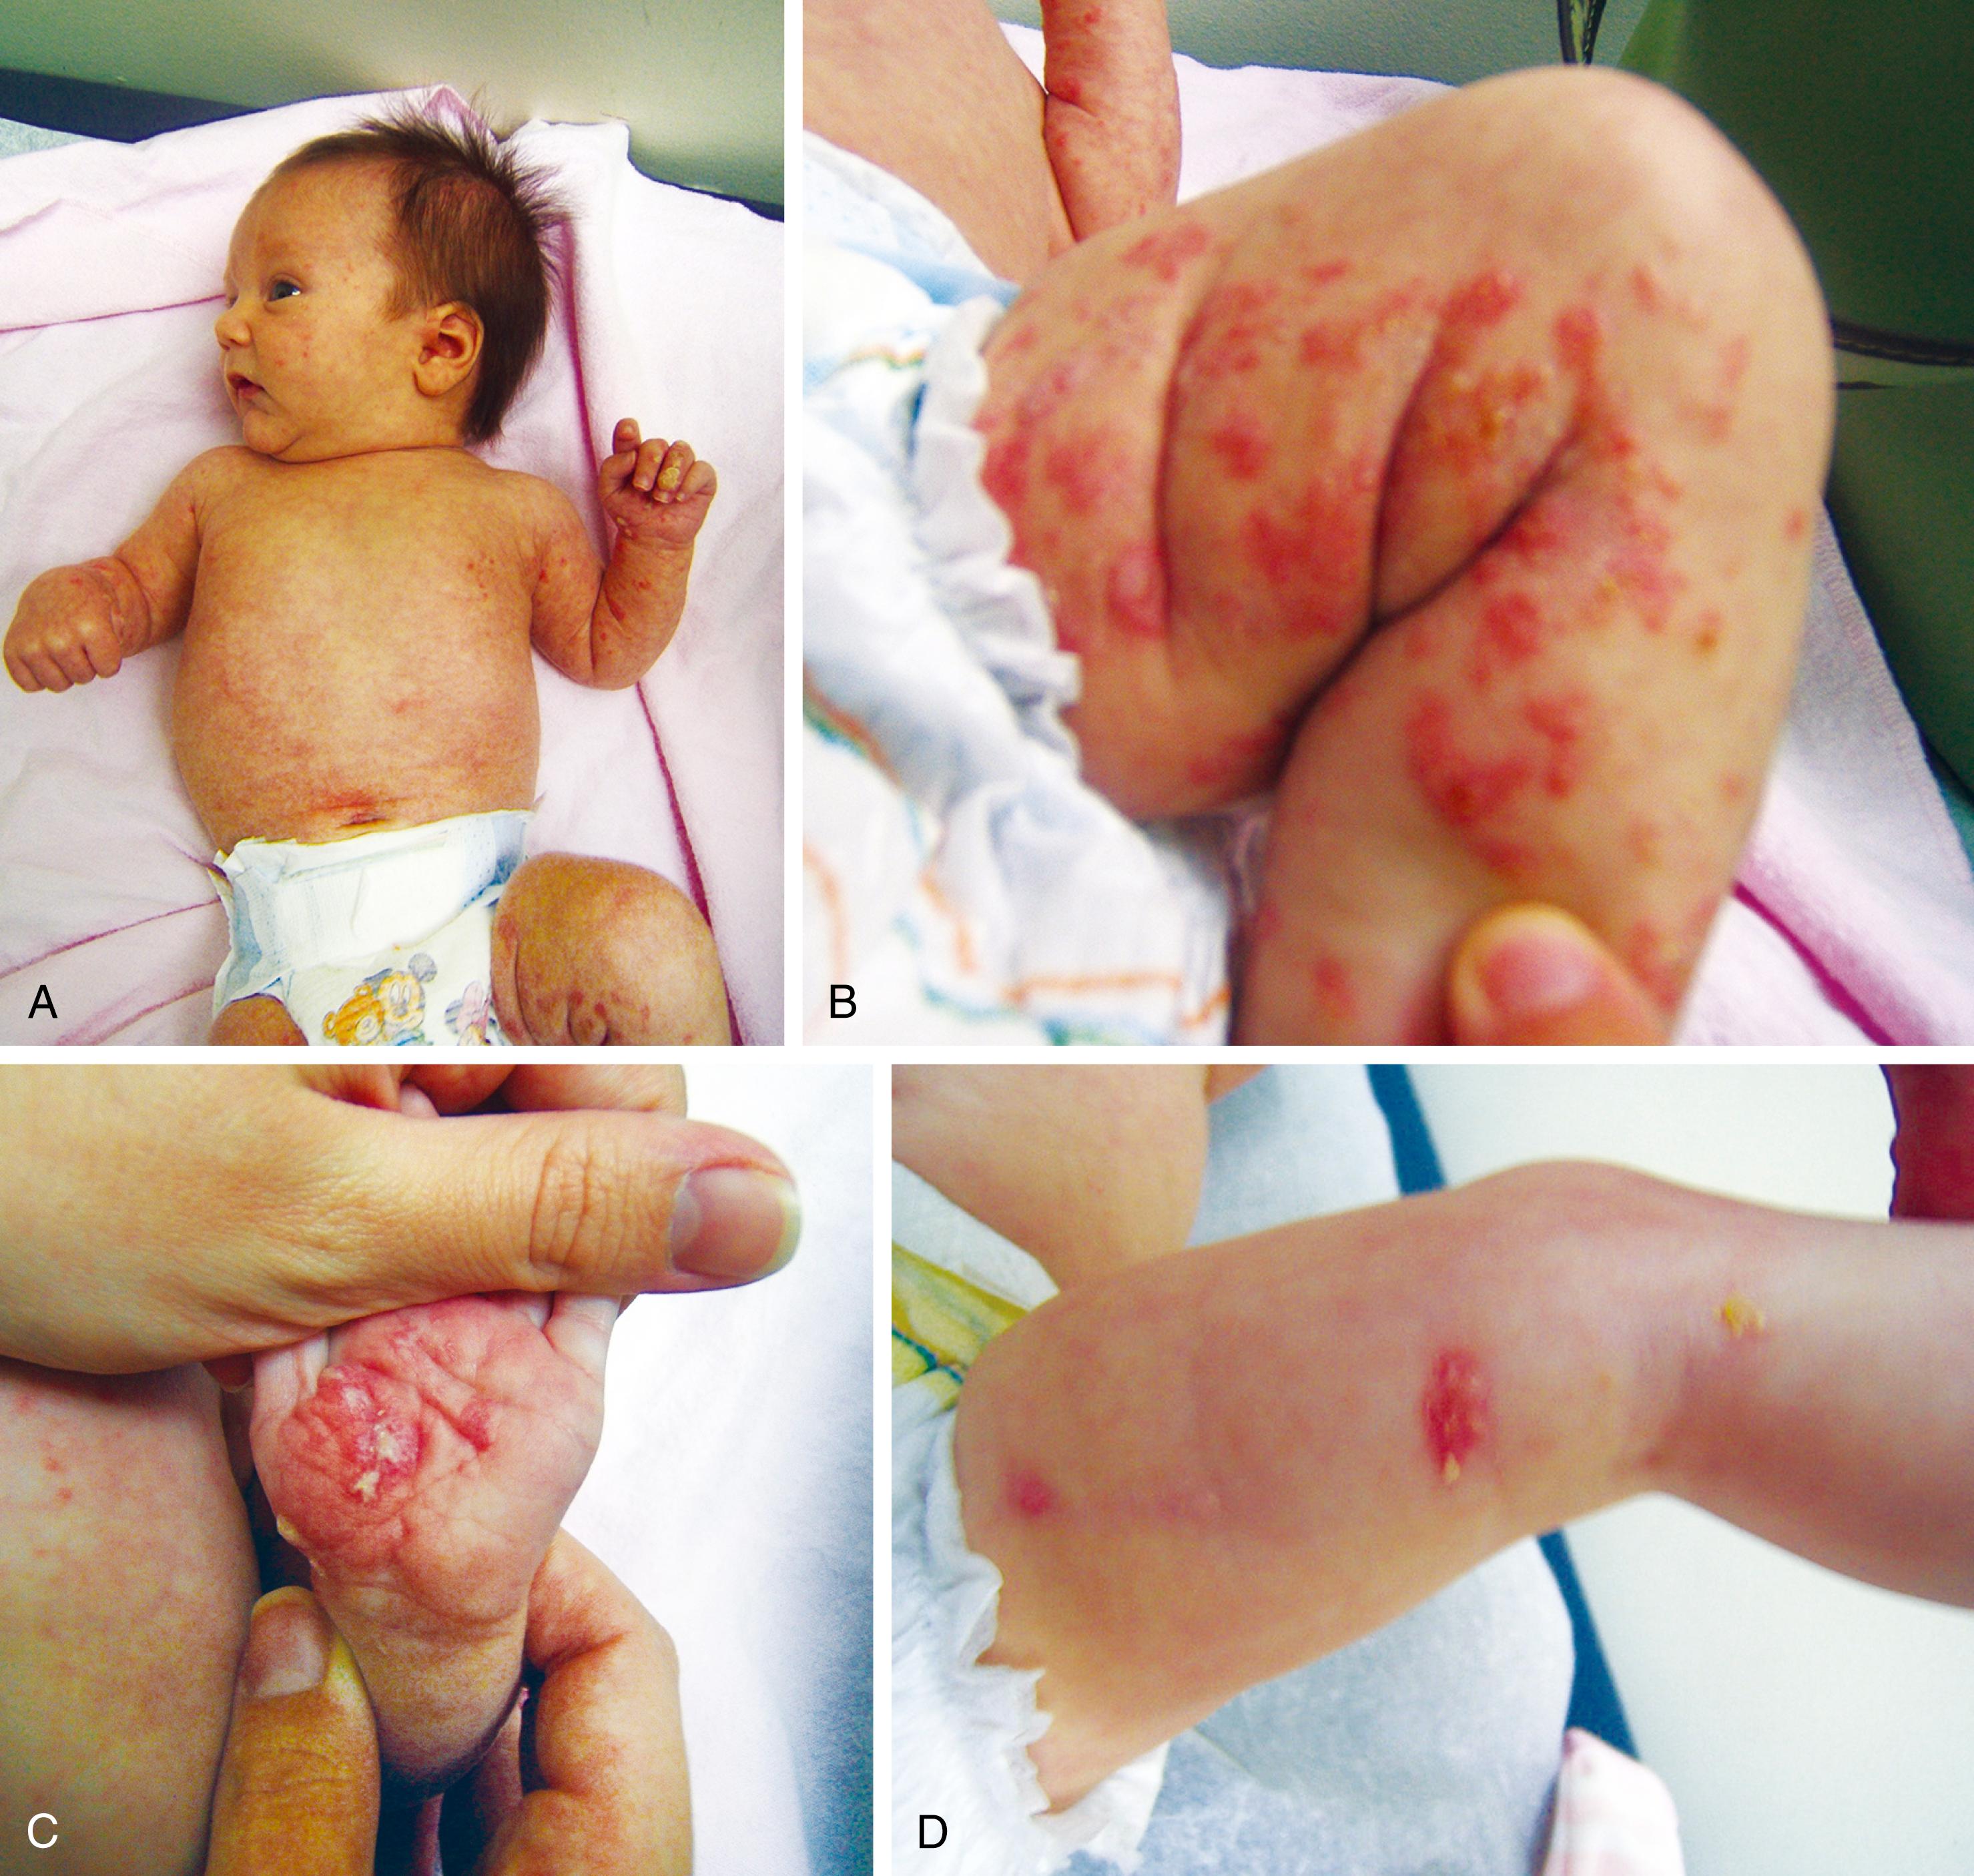 Fig. 1.29, Incontinentia pigmenti syndrome. (A–C) At 7 weeks old this patient manifested erythema, and blisters on the trunk and extremities. Hyperkeratotic lesions have already started. This X-linked dominant condition is typically lethal in males. One-third of the patients have psychomotor delays, microcephaly, and seizures, which were not observed in this patient. Pathogenic variant(s) in the NEMO gene at Xq28 are encountered in the majority of patients. By 5 months old, the rash was already resolving. (D) Rash replaced with hyperpigmentation on the trunk and pale hairless patches or streaks subsequently on the lower limbs. Patient was confirmed to have intragenic microdeletion of the NEMO gene, involving exons 4 through 10.